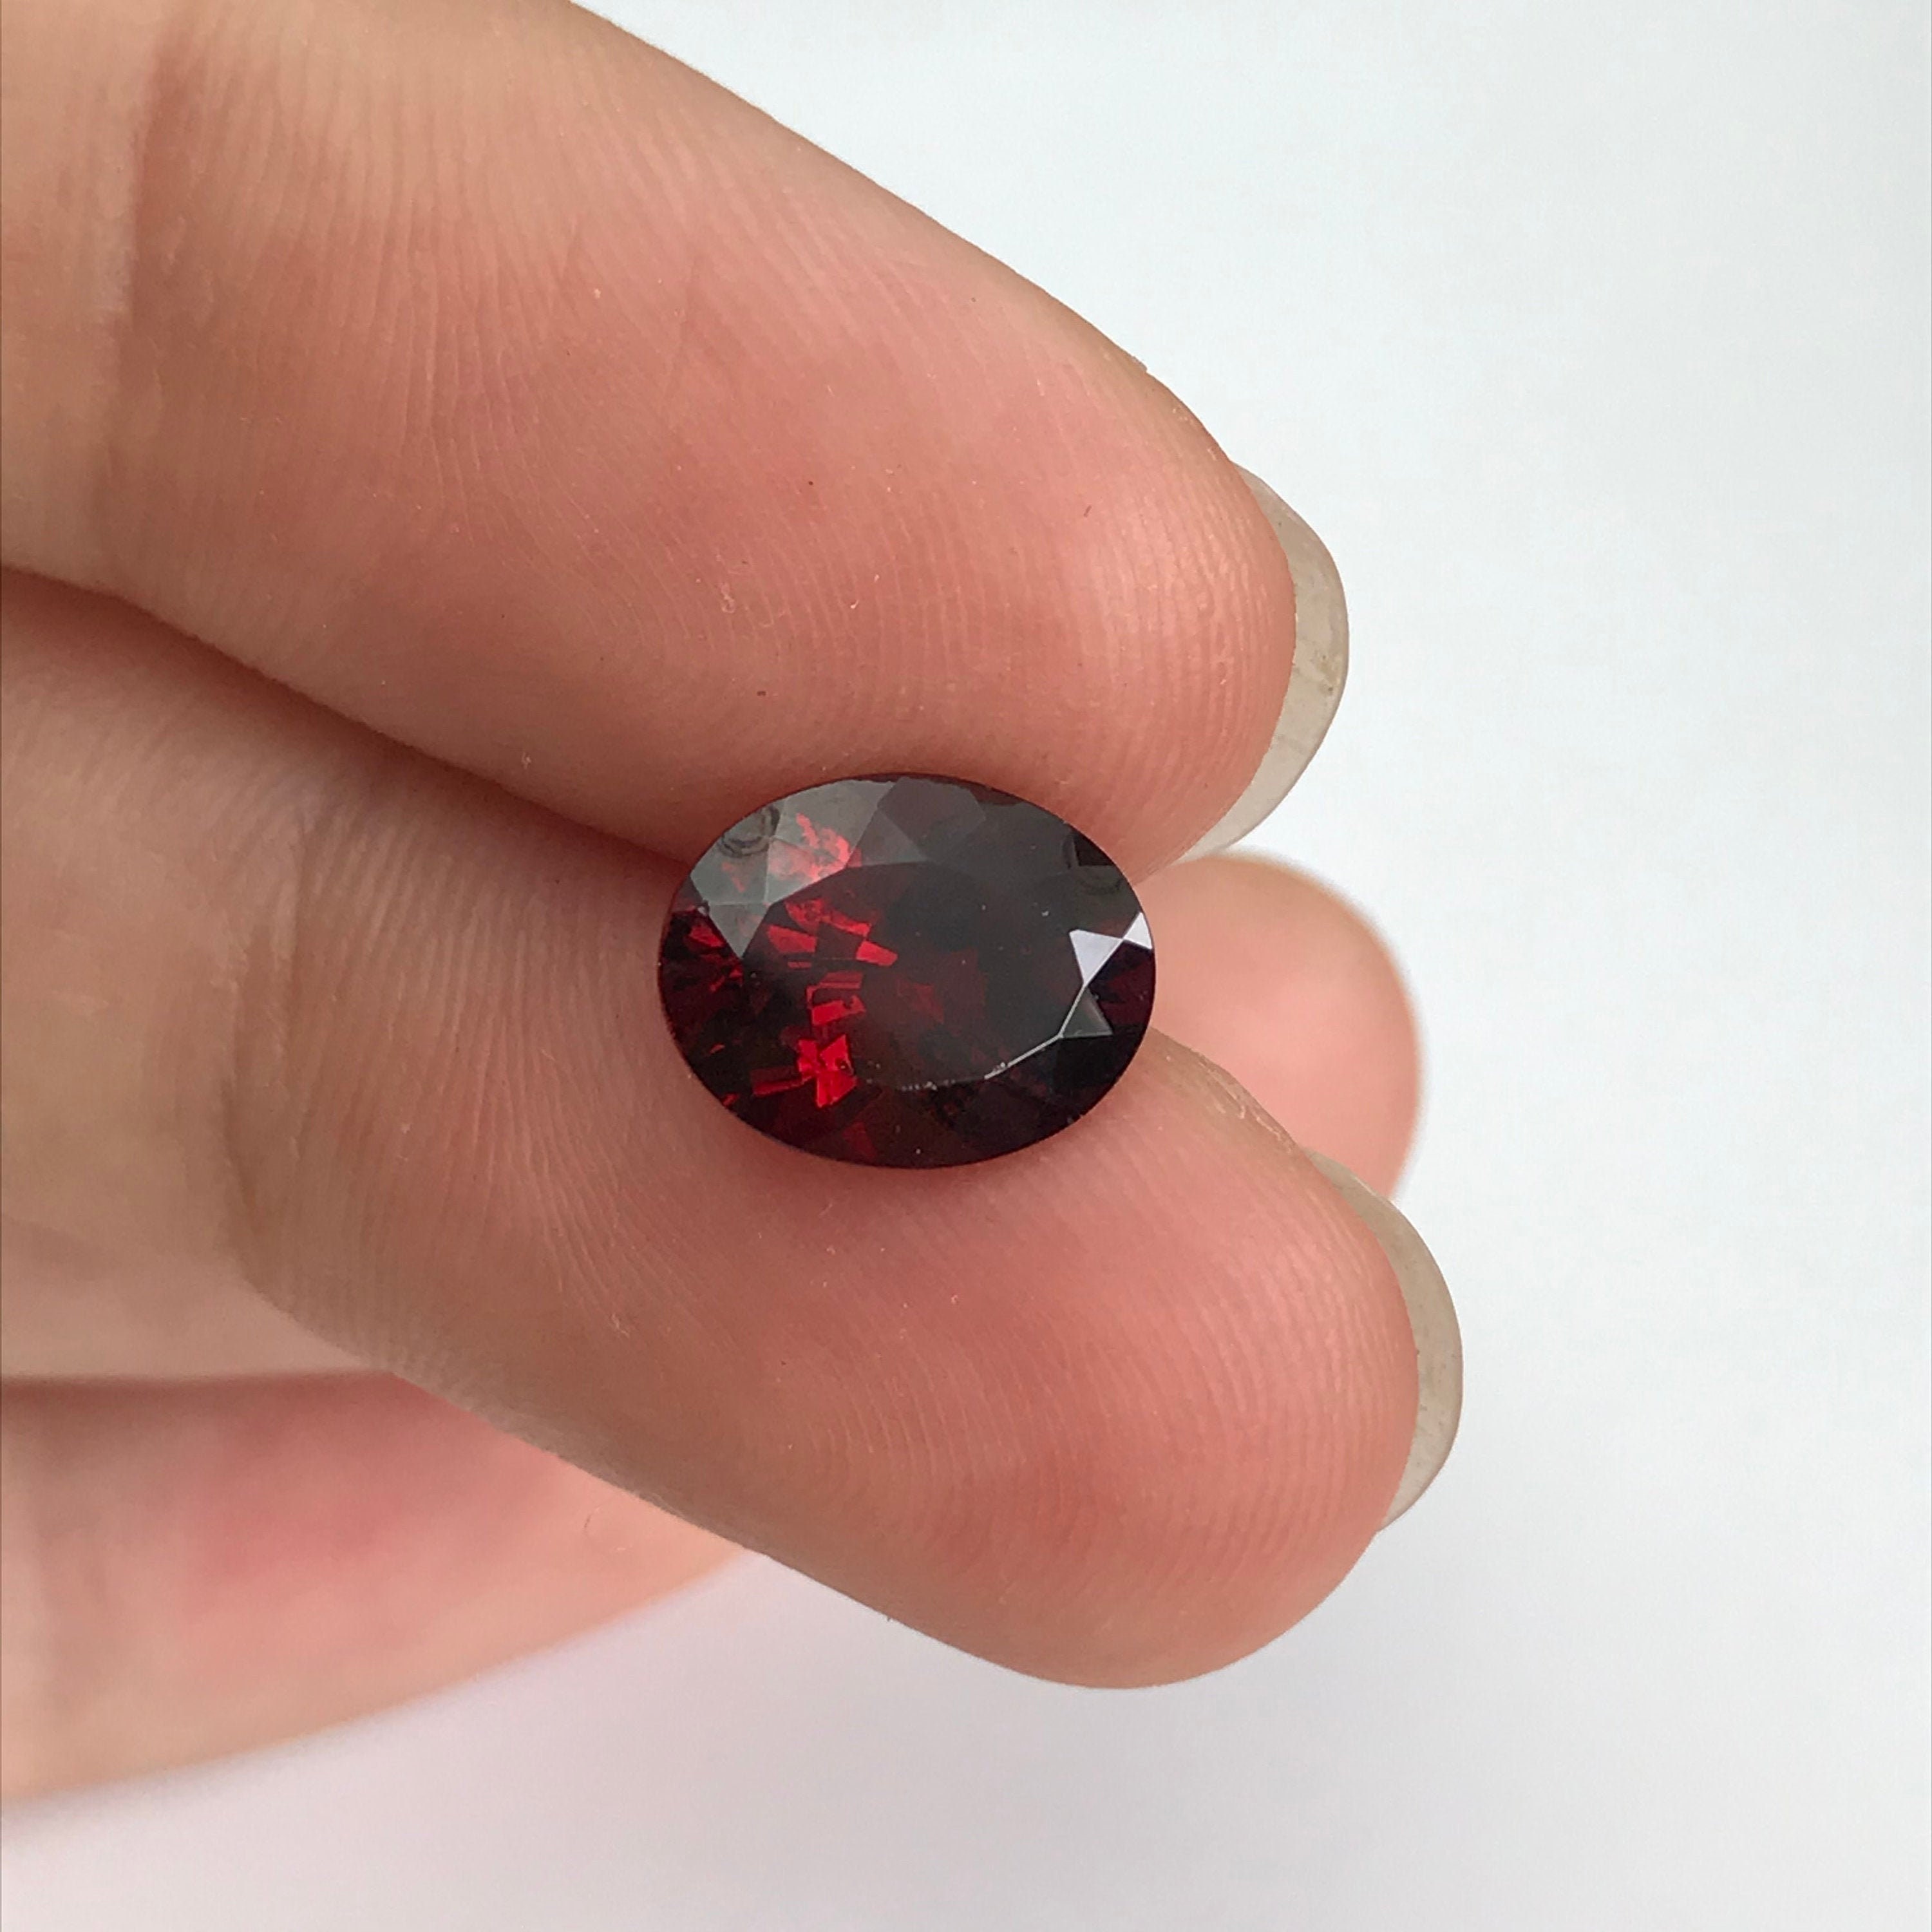 Reclaimed Recycled Gemstone Natural Deep Red Garnet Unmounted Faceted Loose Gemstone 3 carat 10x8mm Oval Cut